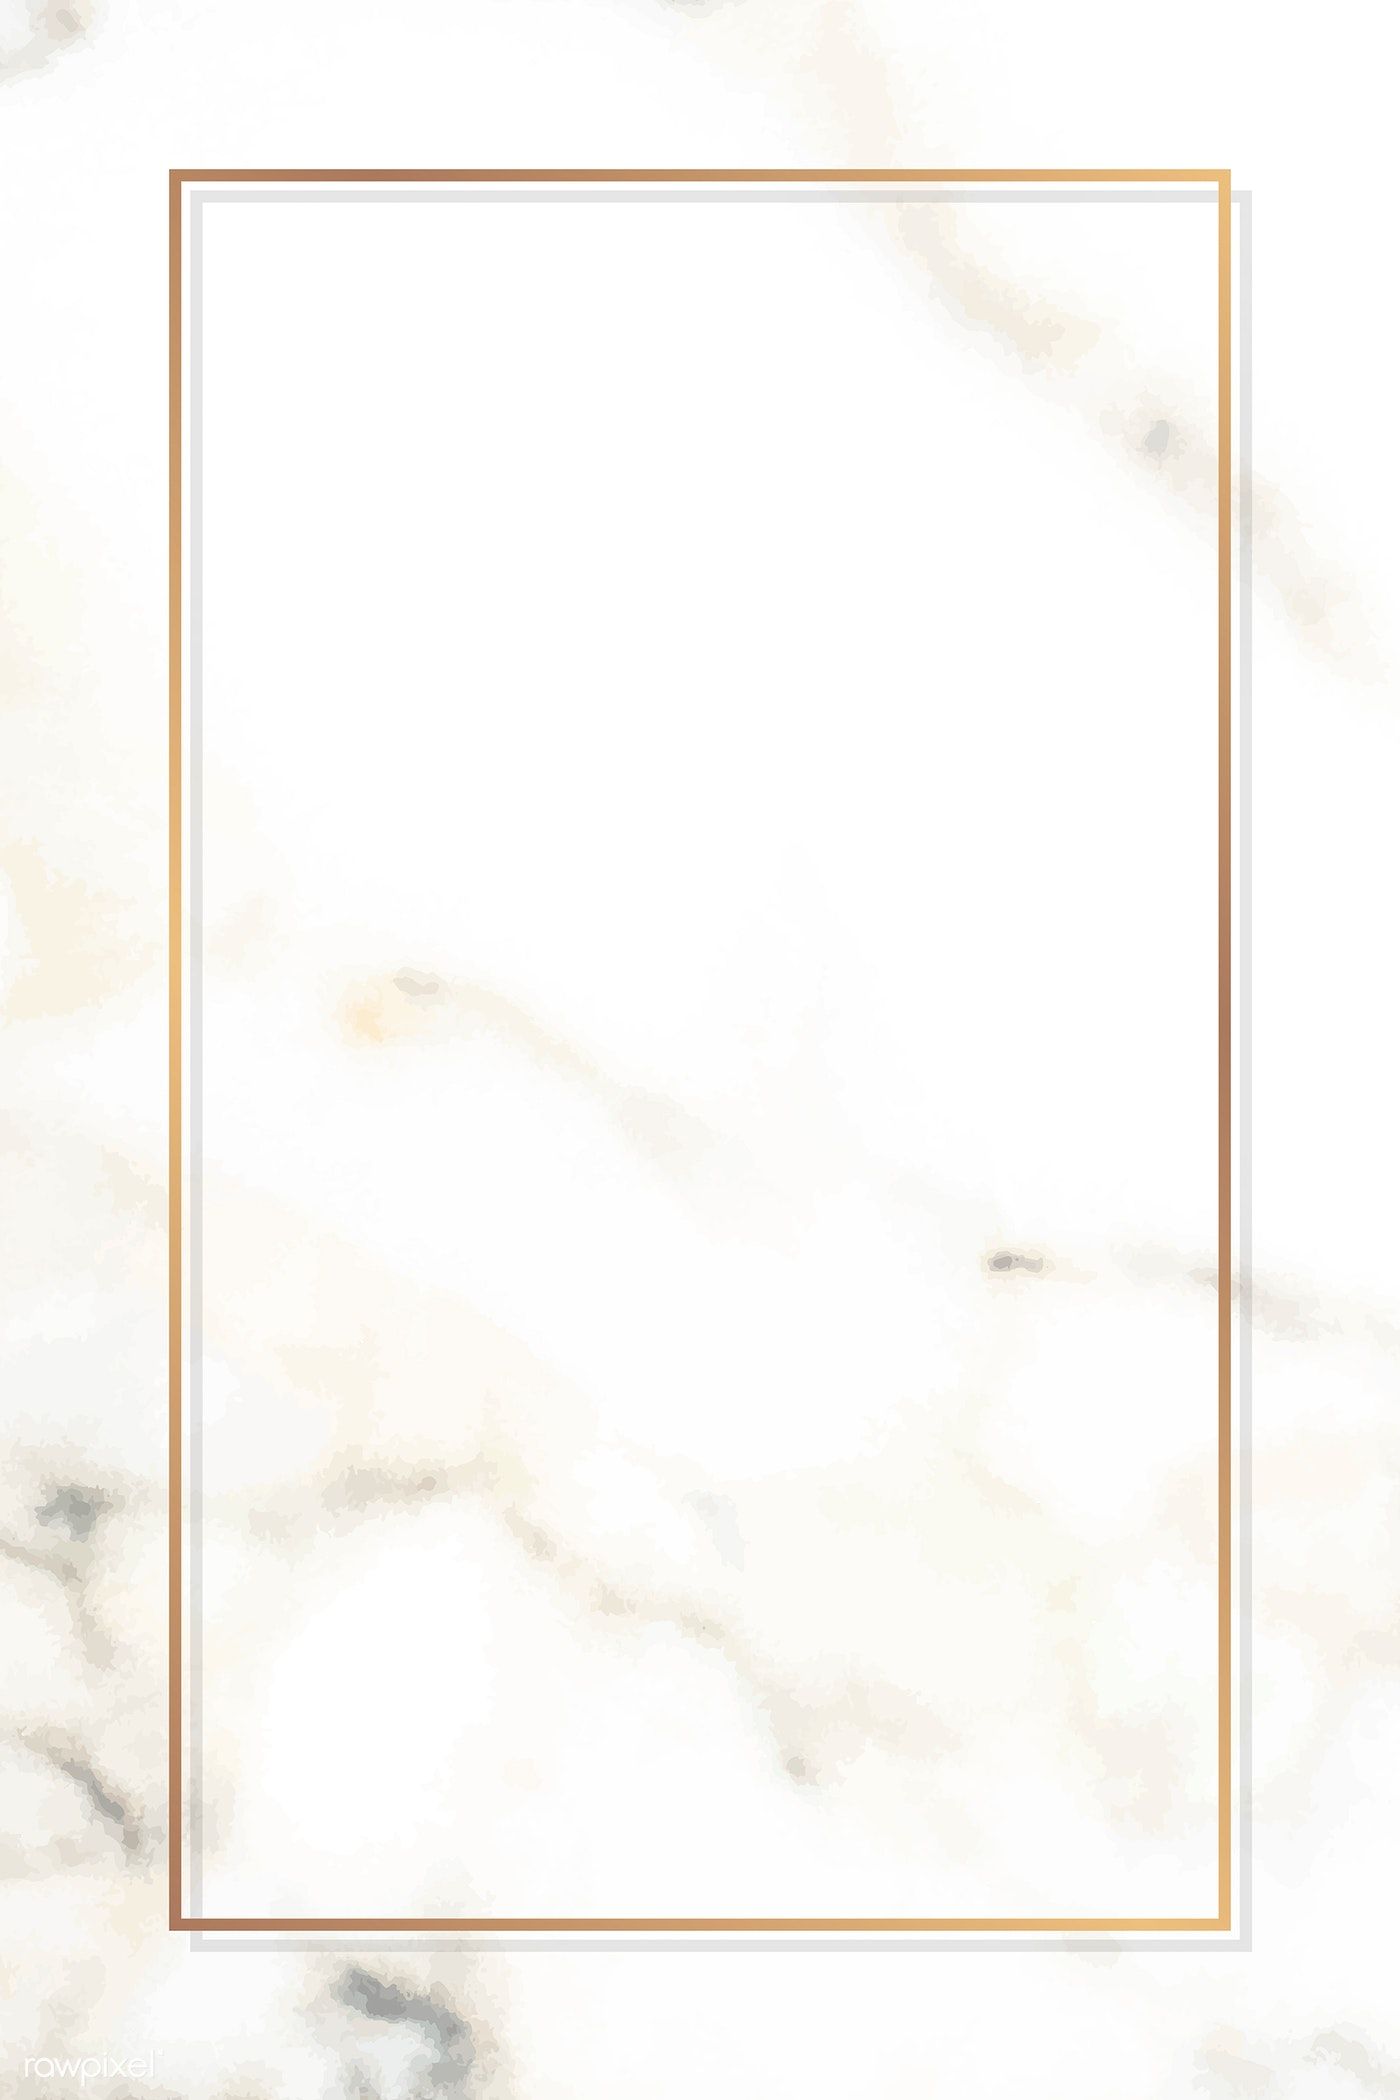 Download premium vector of Rectangle gold frame on a white marble vector. Black marble background, Marble frame, Gold frame